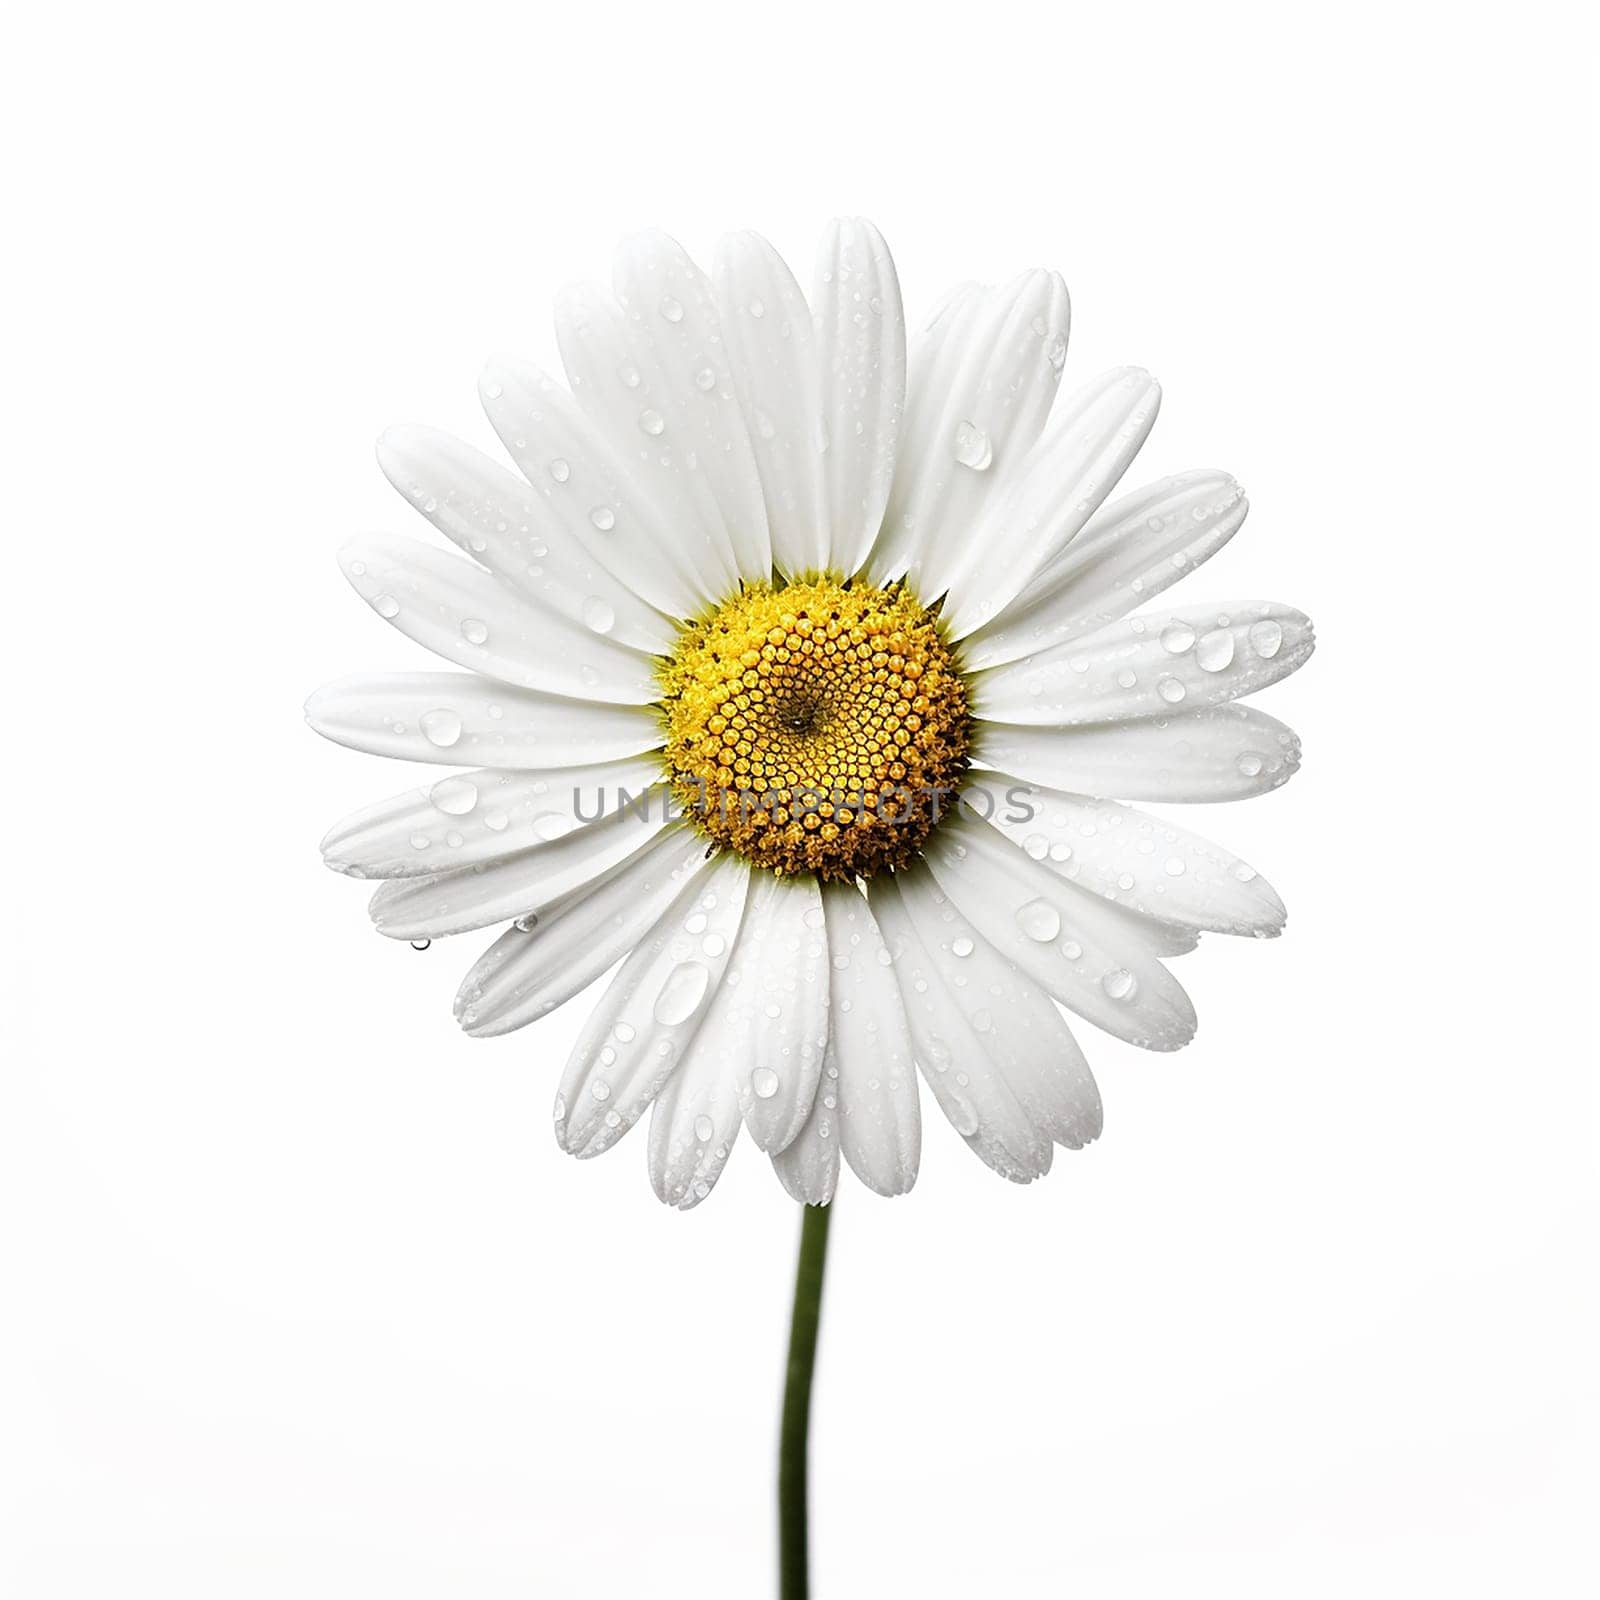 Close up of a white daisy with water droplets against a white background by Hype2art